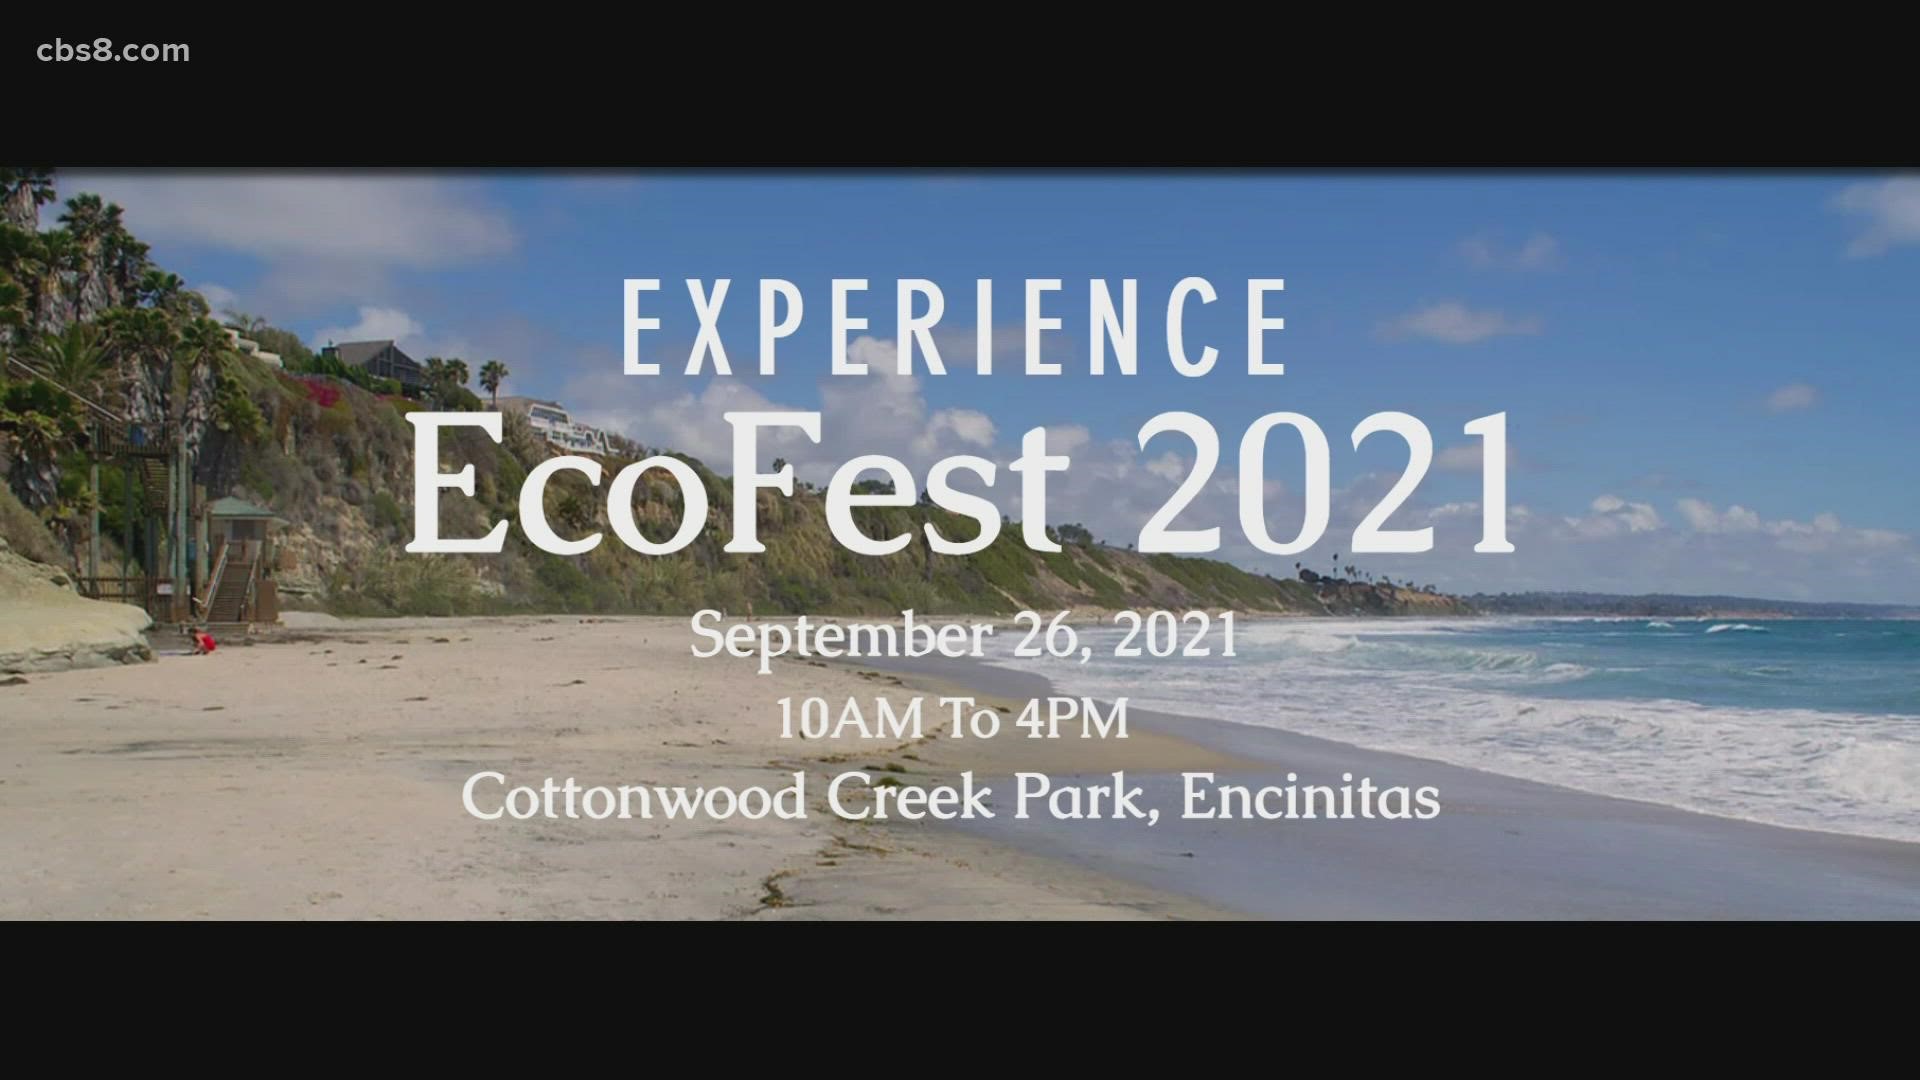 Executive Chairman of Ecofest, John Gjata and artist and environmental educator, Janis Jones joined Morning Extra to talk about this weekend's event.